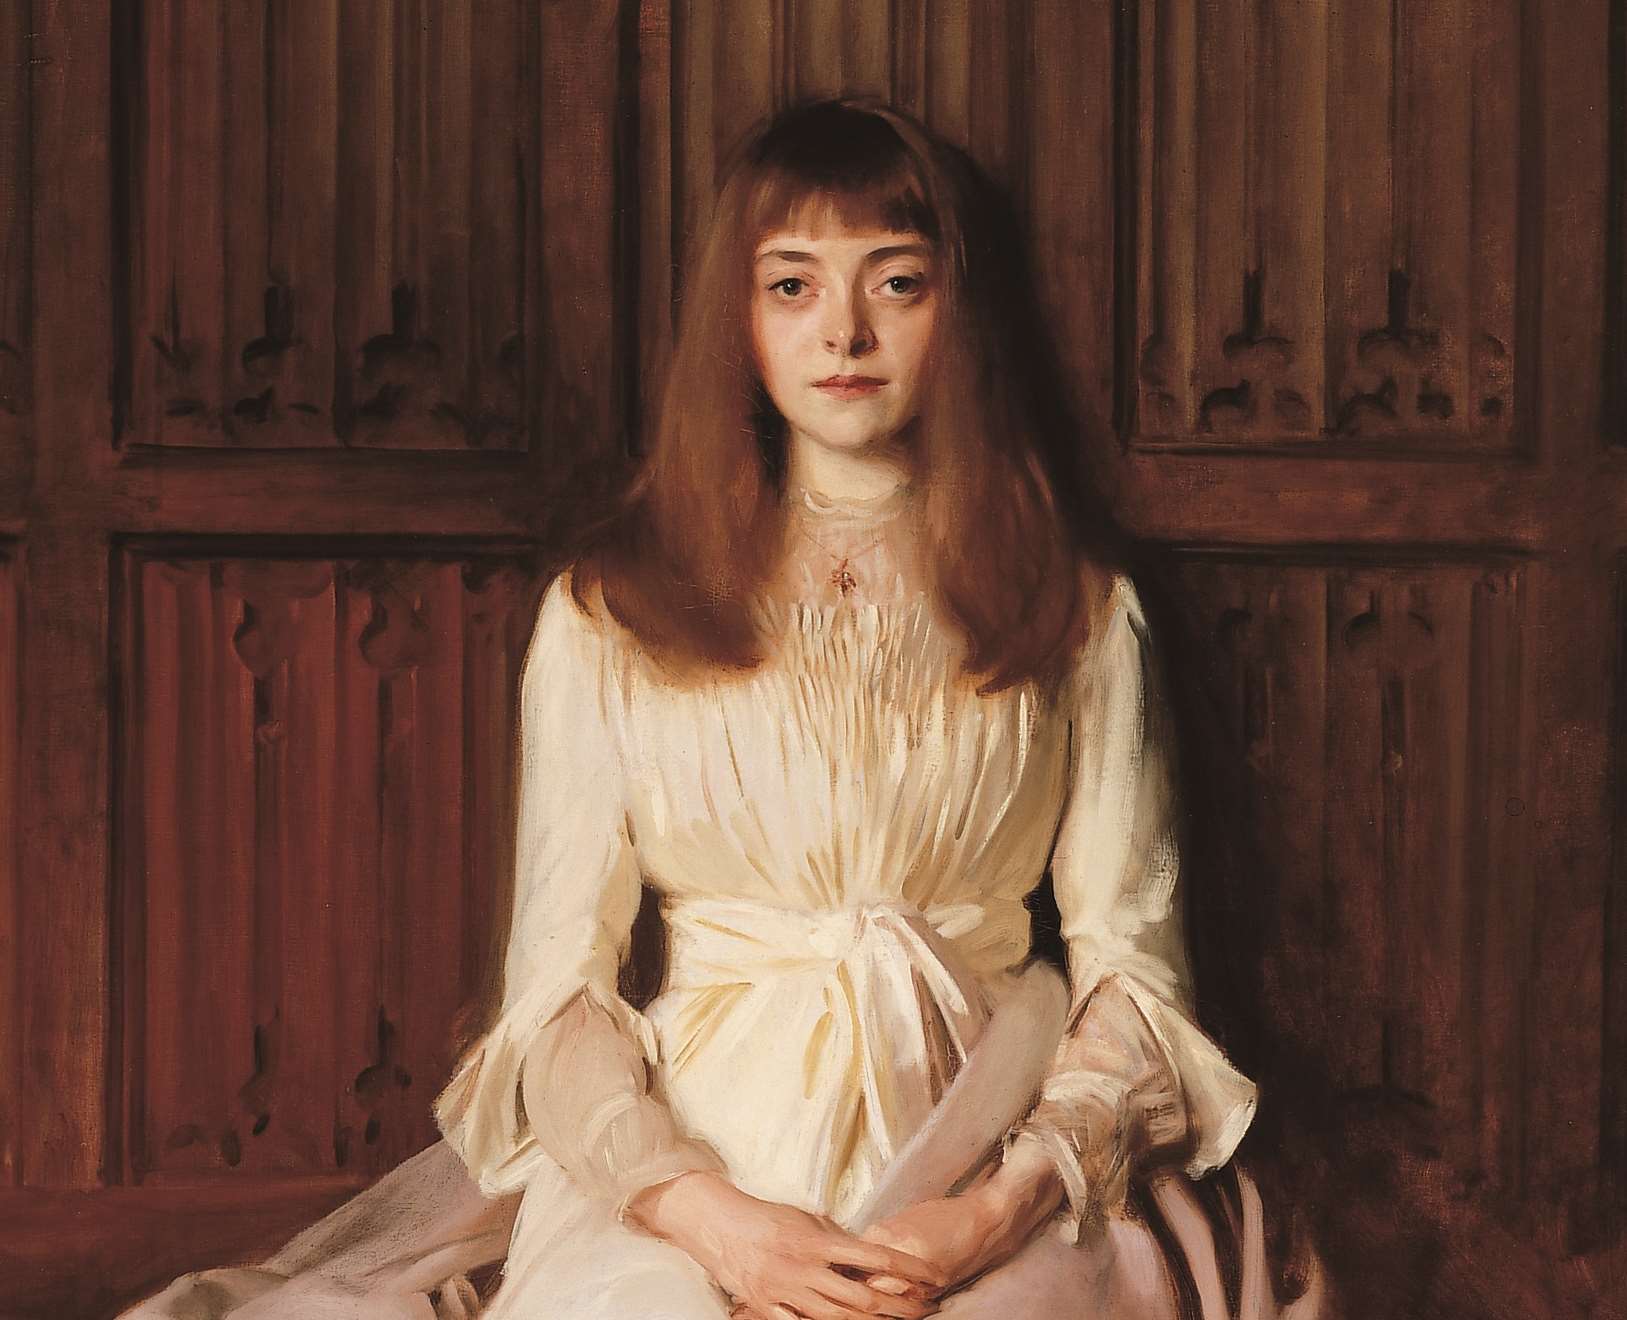 Elsie Palmer (A Young Lady in White) painted by John Singer Sargent is at Ightham Mote for a little longer